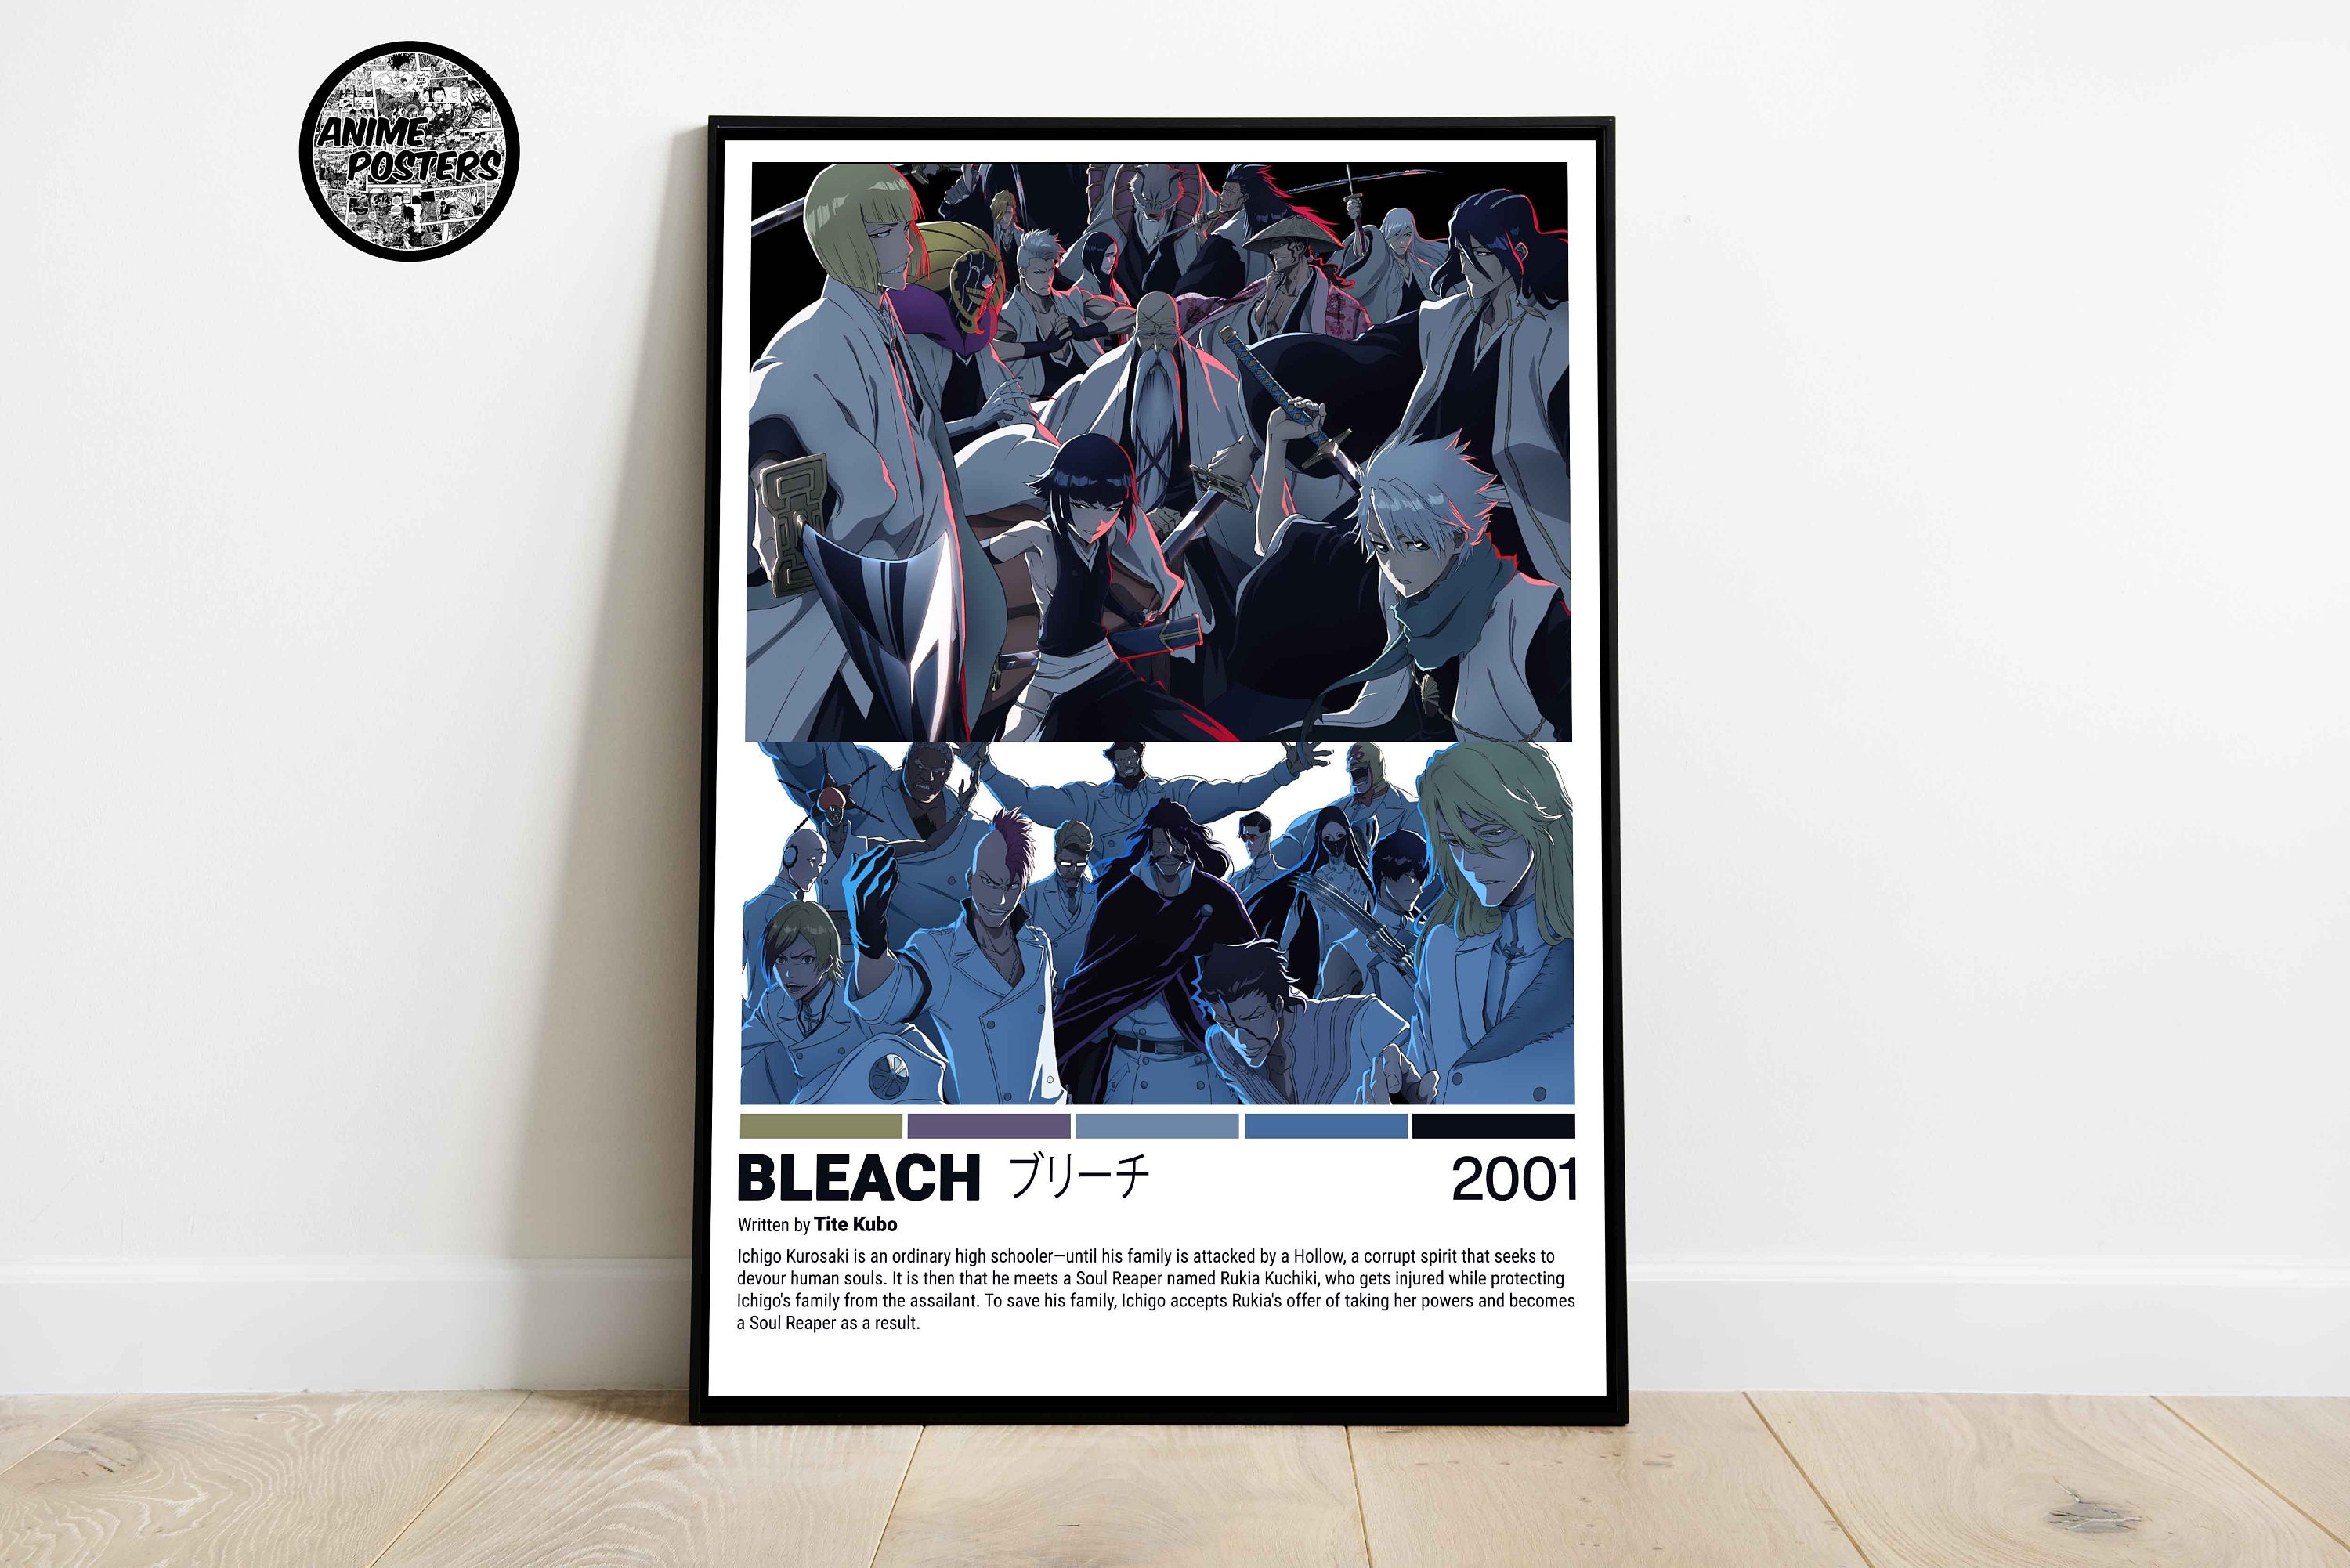 POSTER STOP ONLINE Bleach - Manga Anime TV Show Poster Print (Group -  Chained) (Size 24 x 36) (Poster & Poster Strip Set)